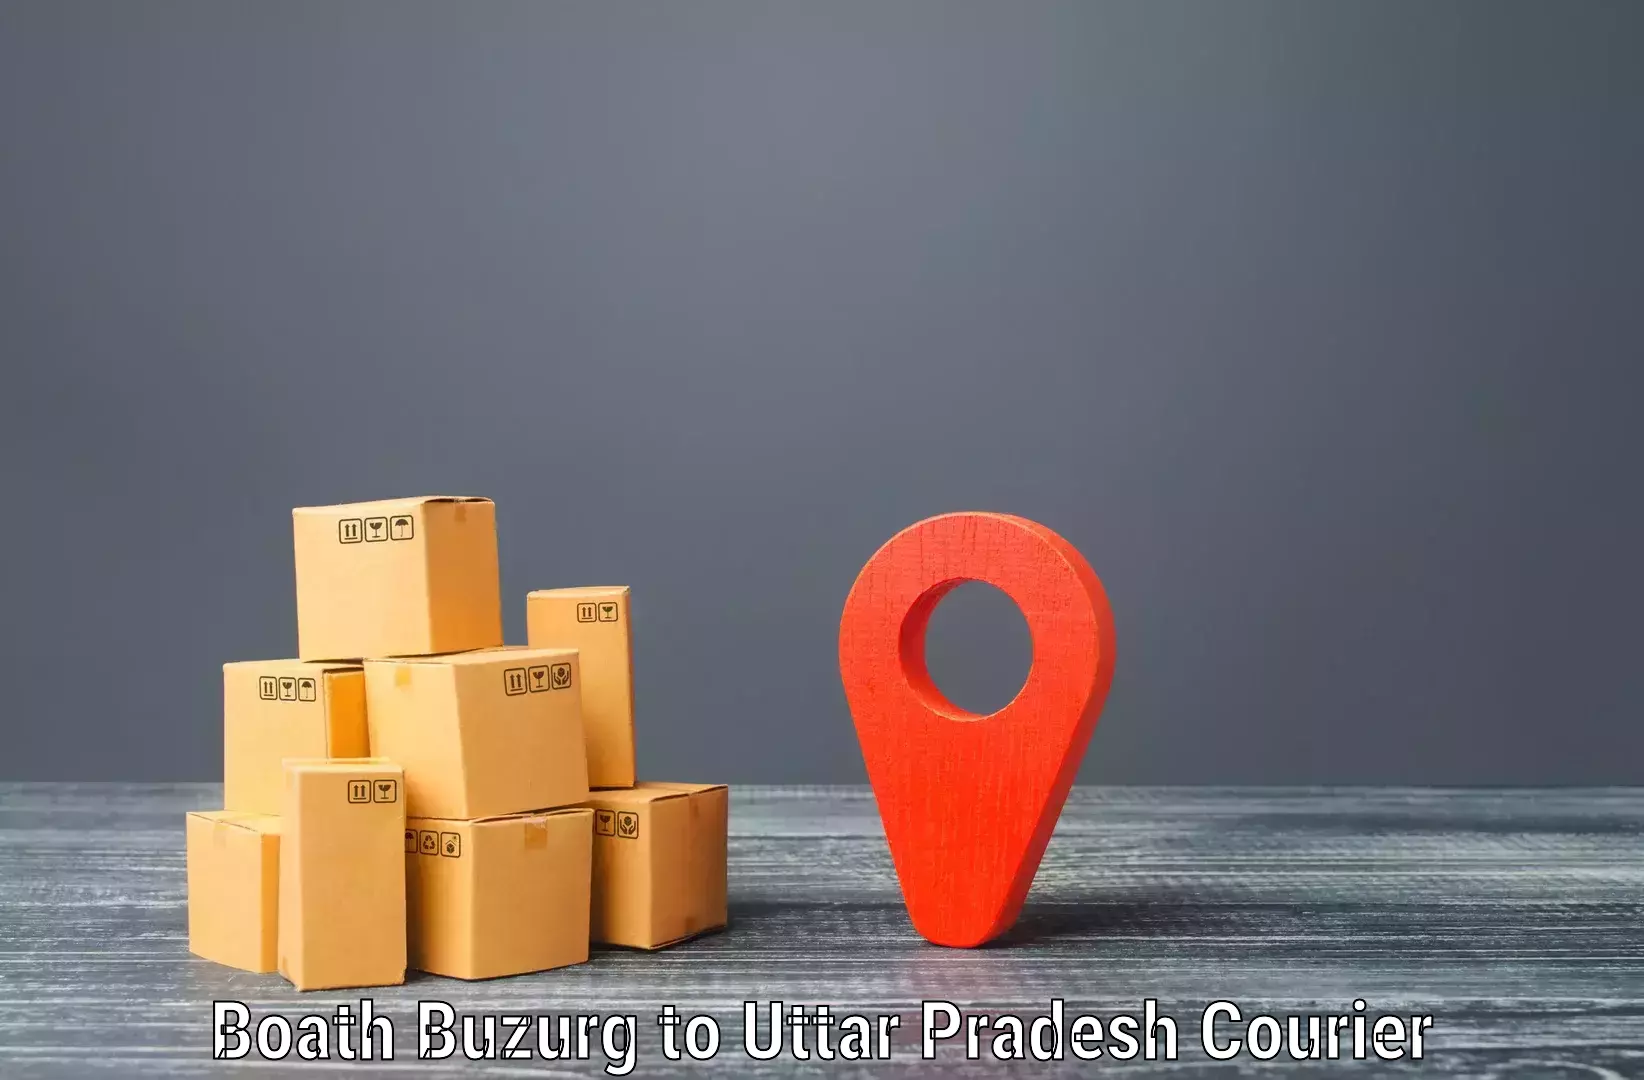 Flexible delivery schedules Boath Buzurg to Fatehabad Agra